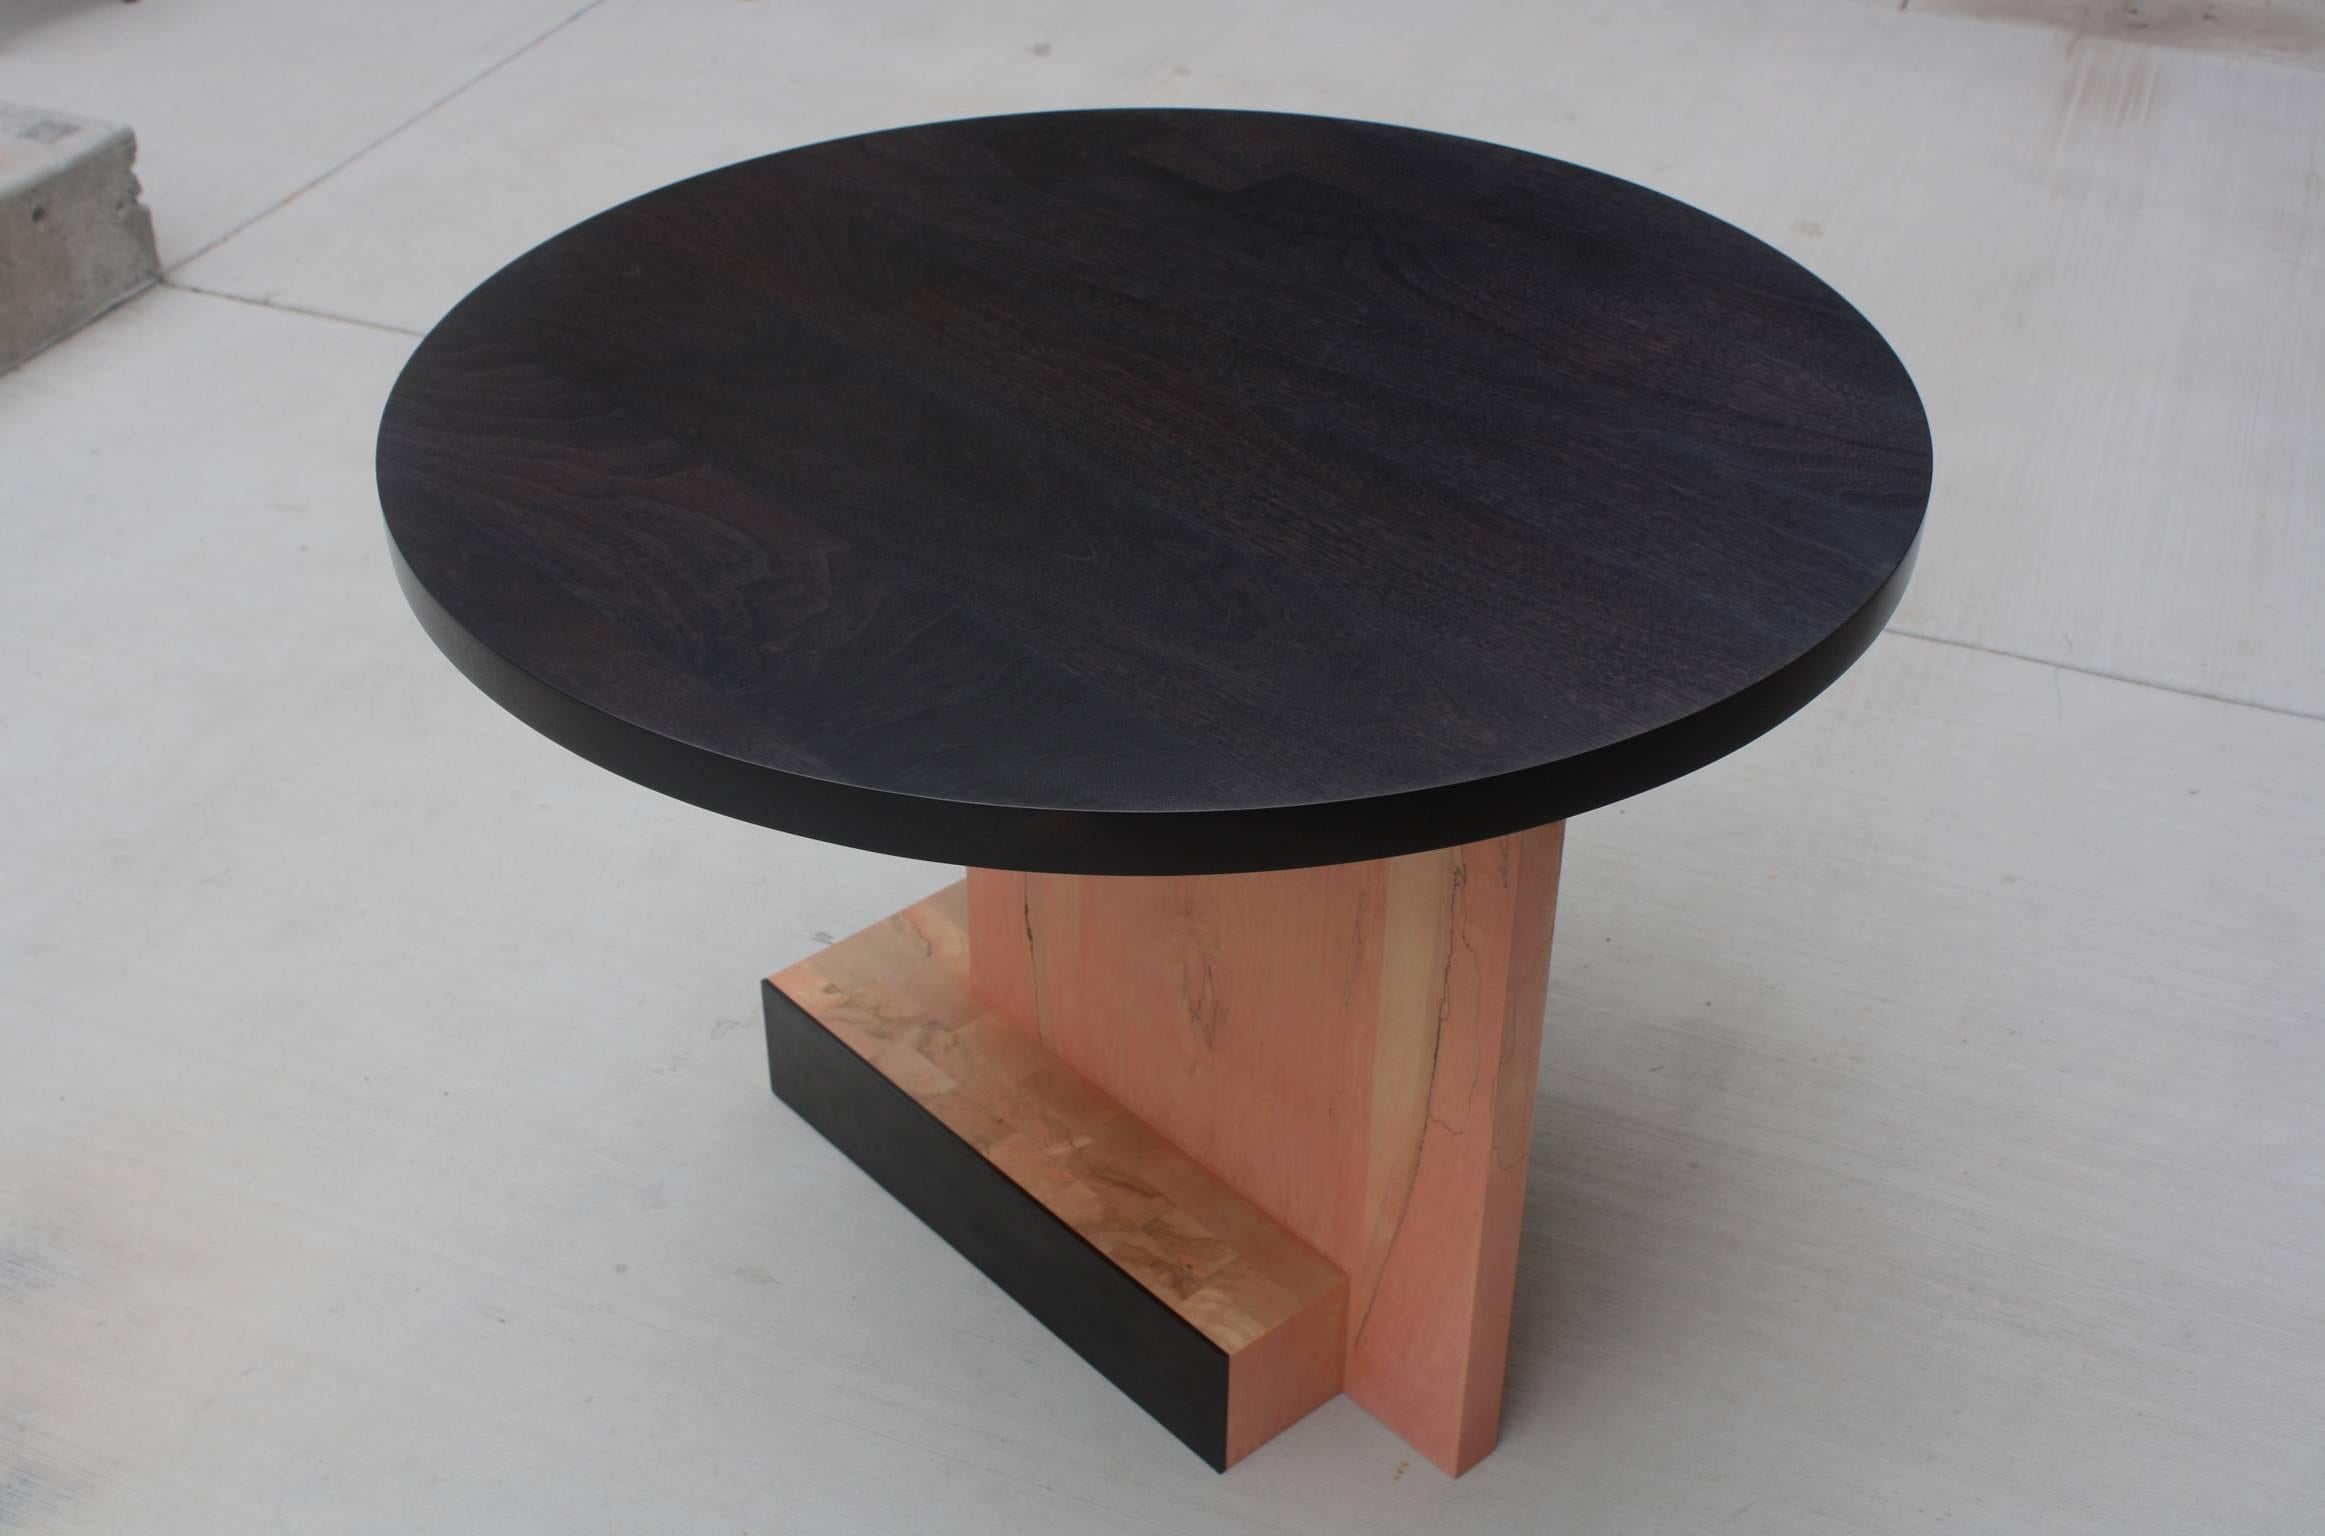 Handmade in Chicago by Laylo Studio, this customizable dining table features a round table top on an asymmetric butcher block base clad with metal panels. The solid wood butcher block base is punctuated by a vertical panel set decidedly off center